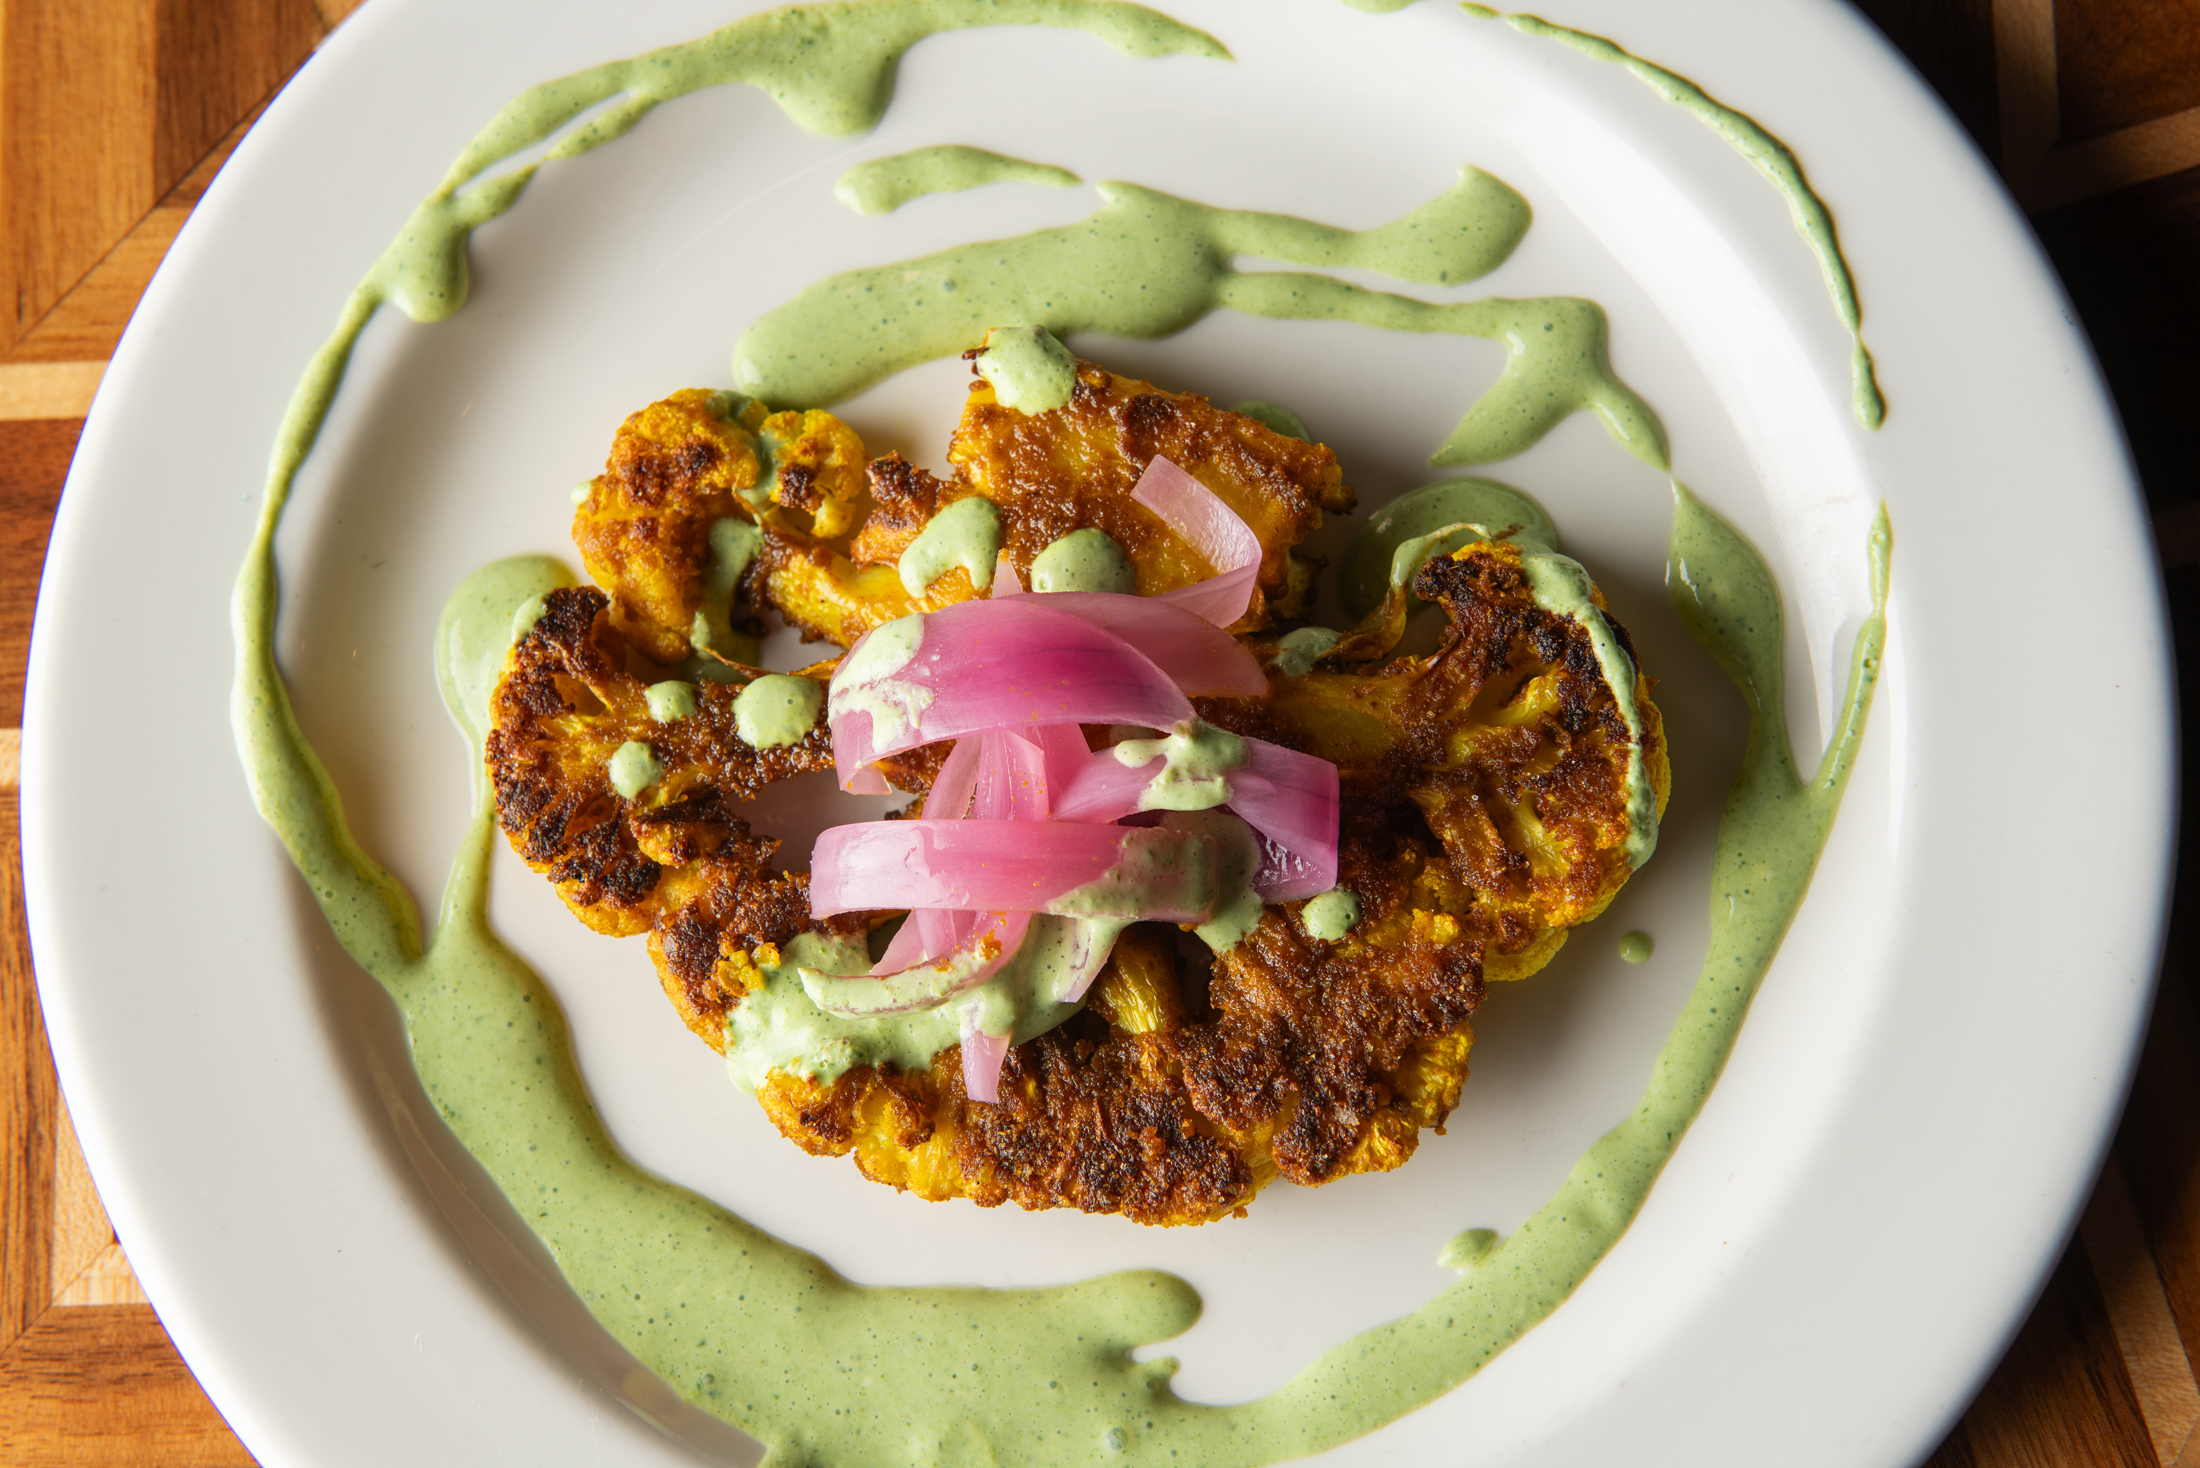 Alex Ewigleben's entry for the 2023 Chef's Specialty Recipe Competition: Curry Cauliflower Steak with Cilantro Yogurt and Pickled Red Onion